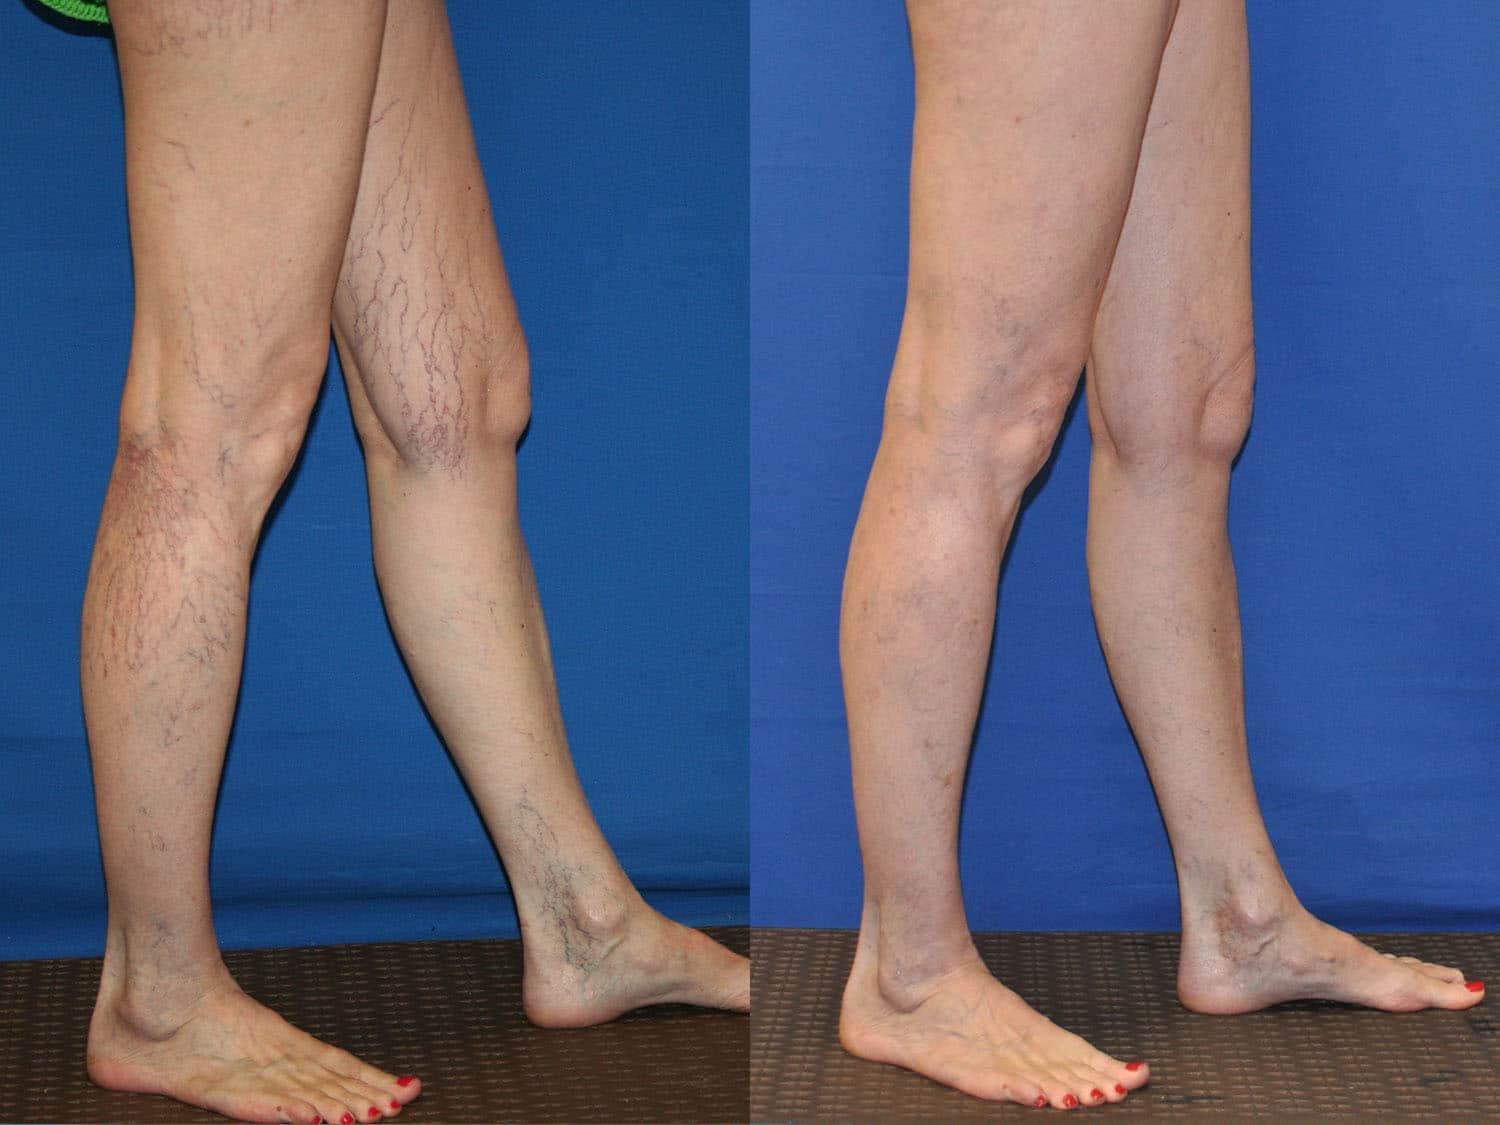 Spider Veins Patient Treated at Ciao Bella